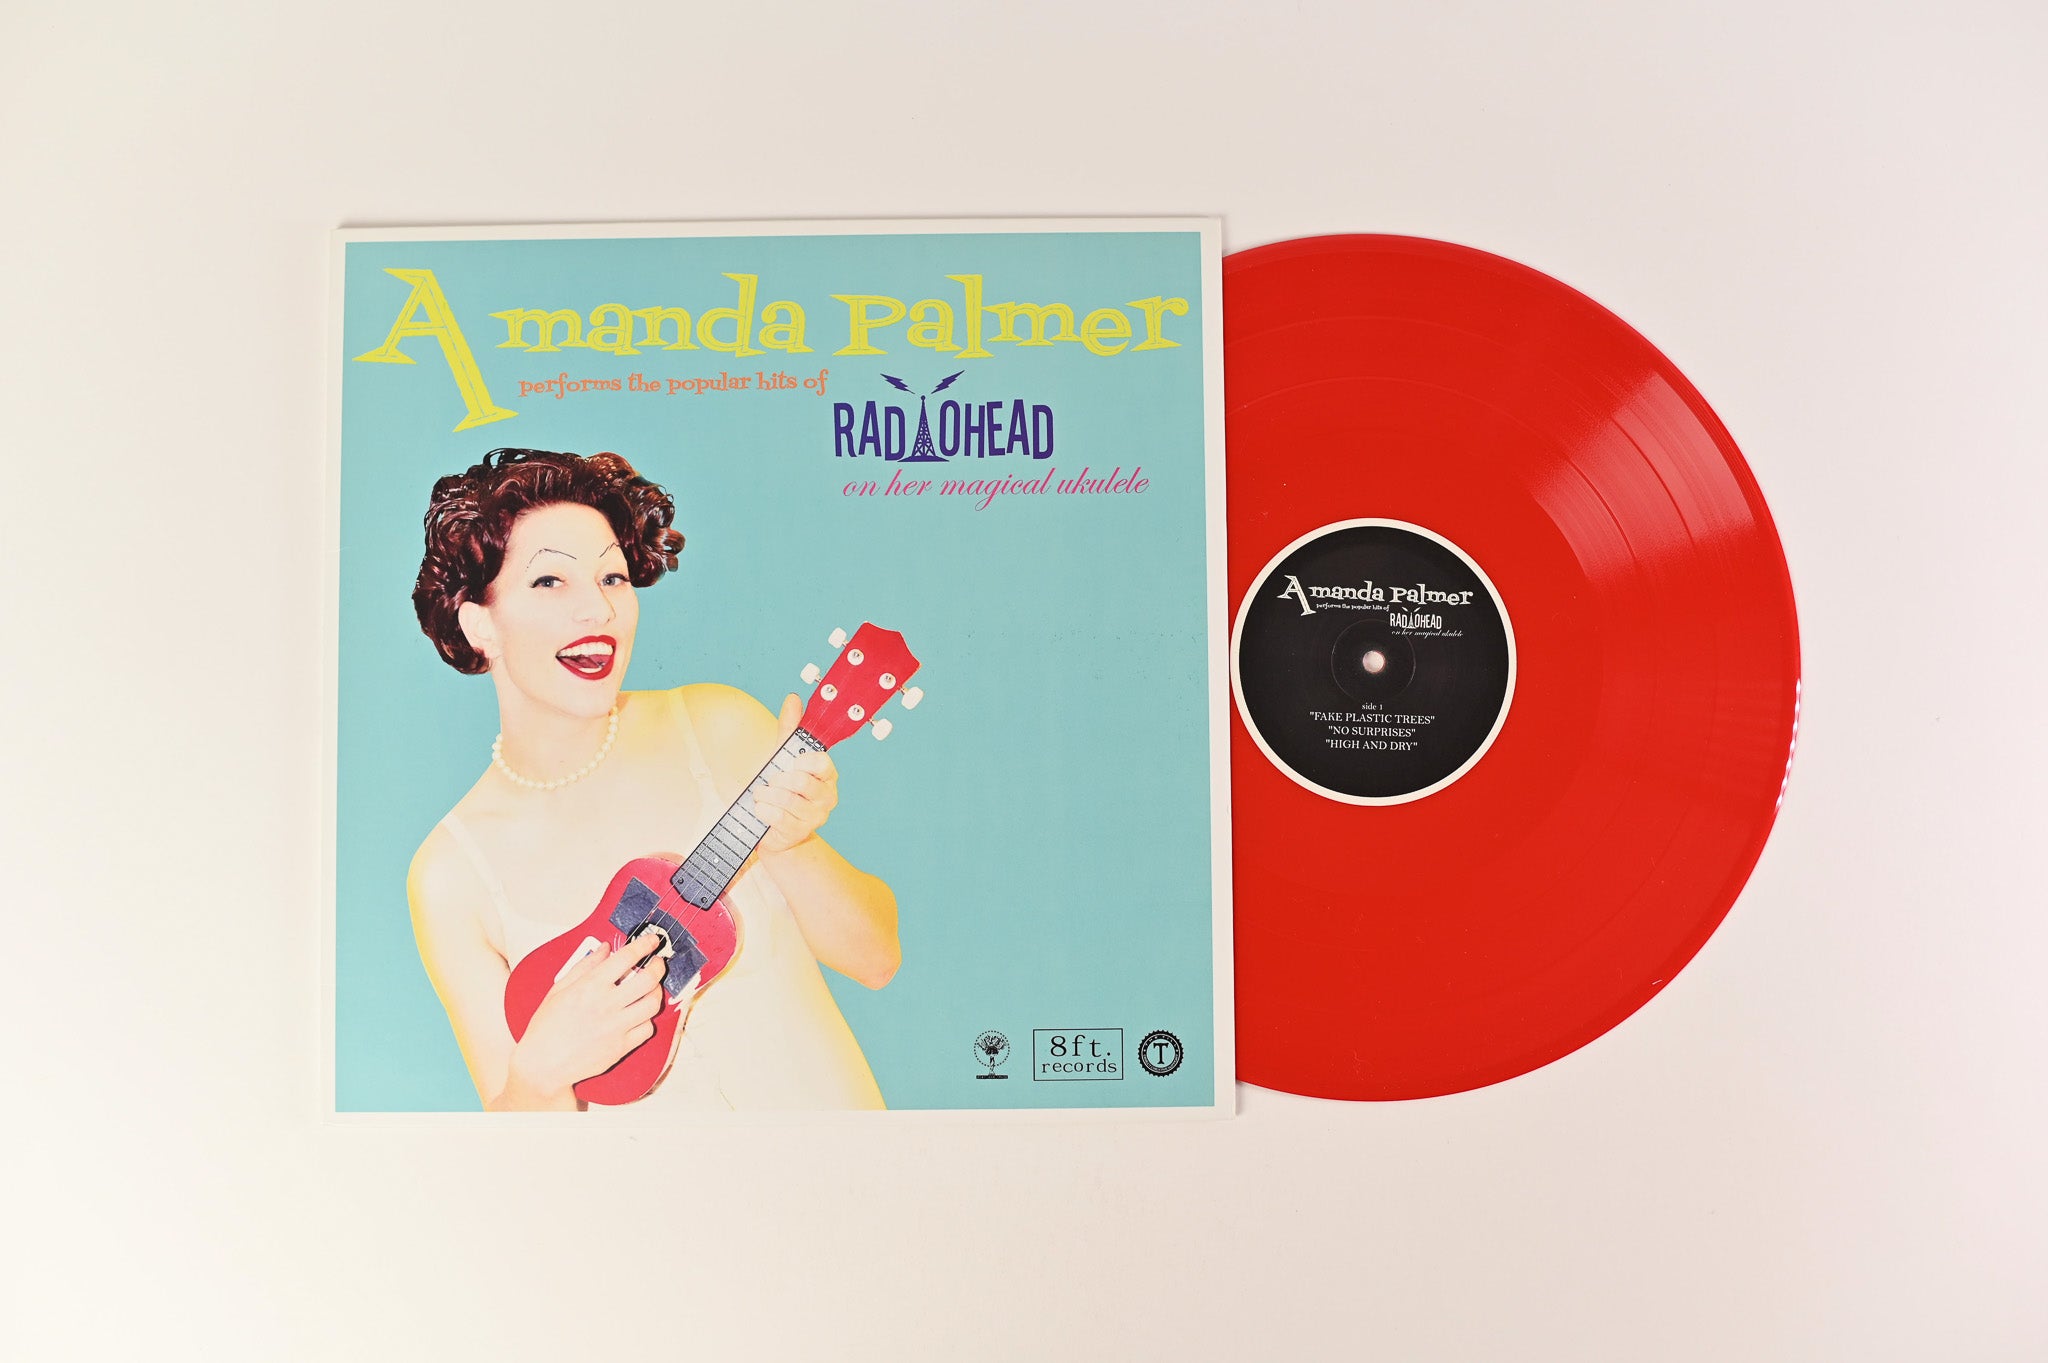 Amanda Palmer - Performs The Popular Hits Of Radiohead On Her Magical Ukulele on 8 Ft Ltd Numbered Red